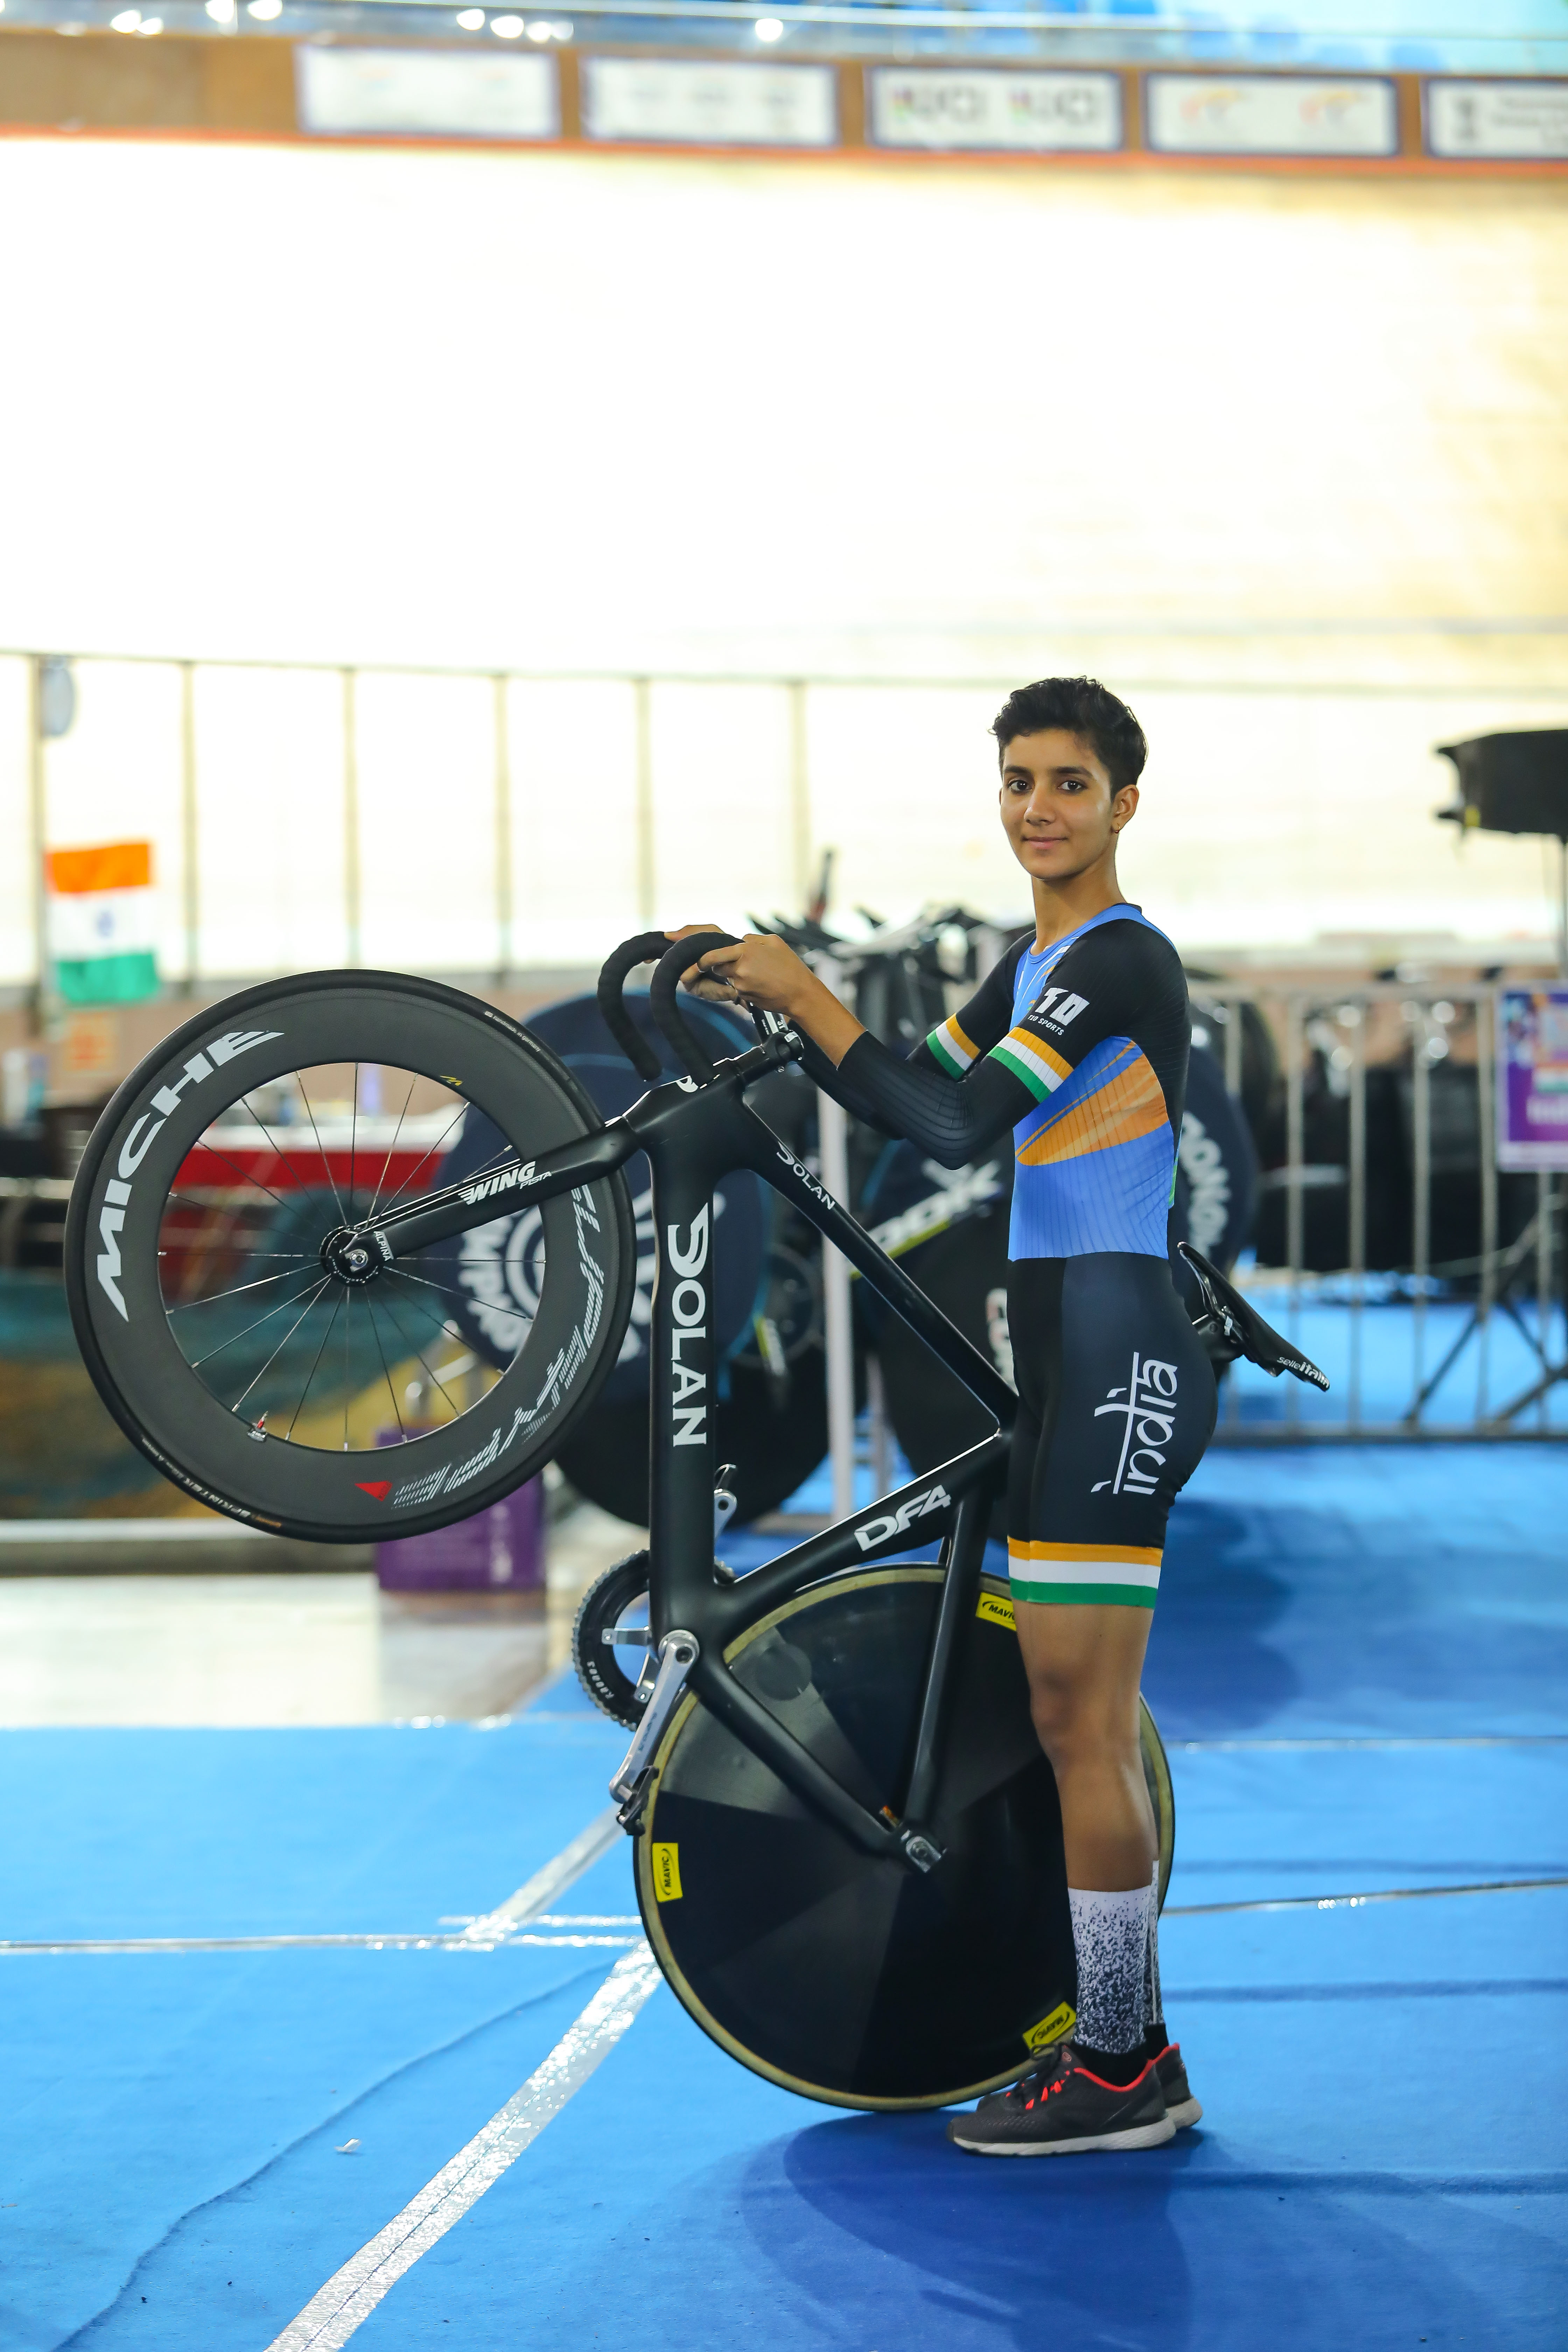 Amazing performance by the Asian riders at Asian Track Cycling Championships